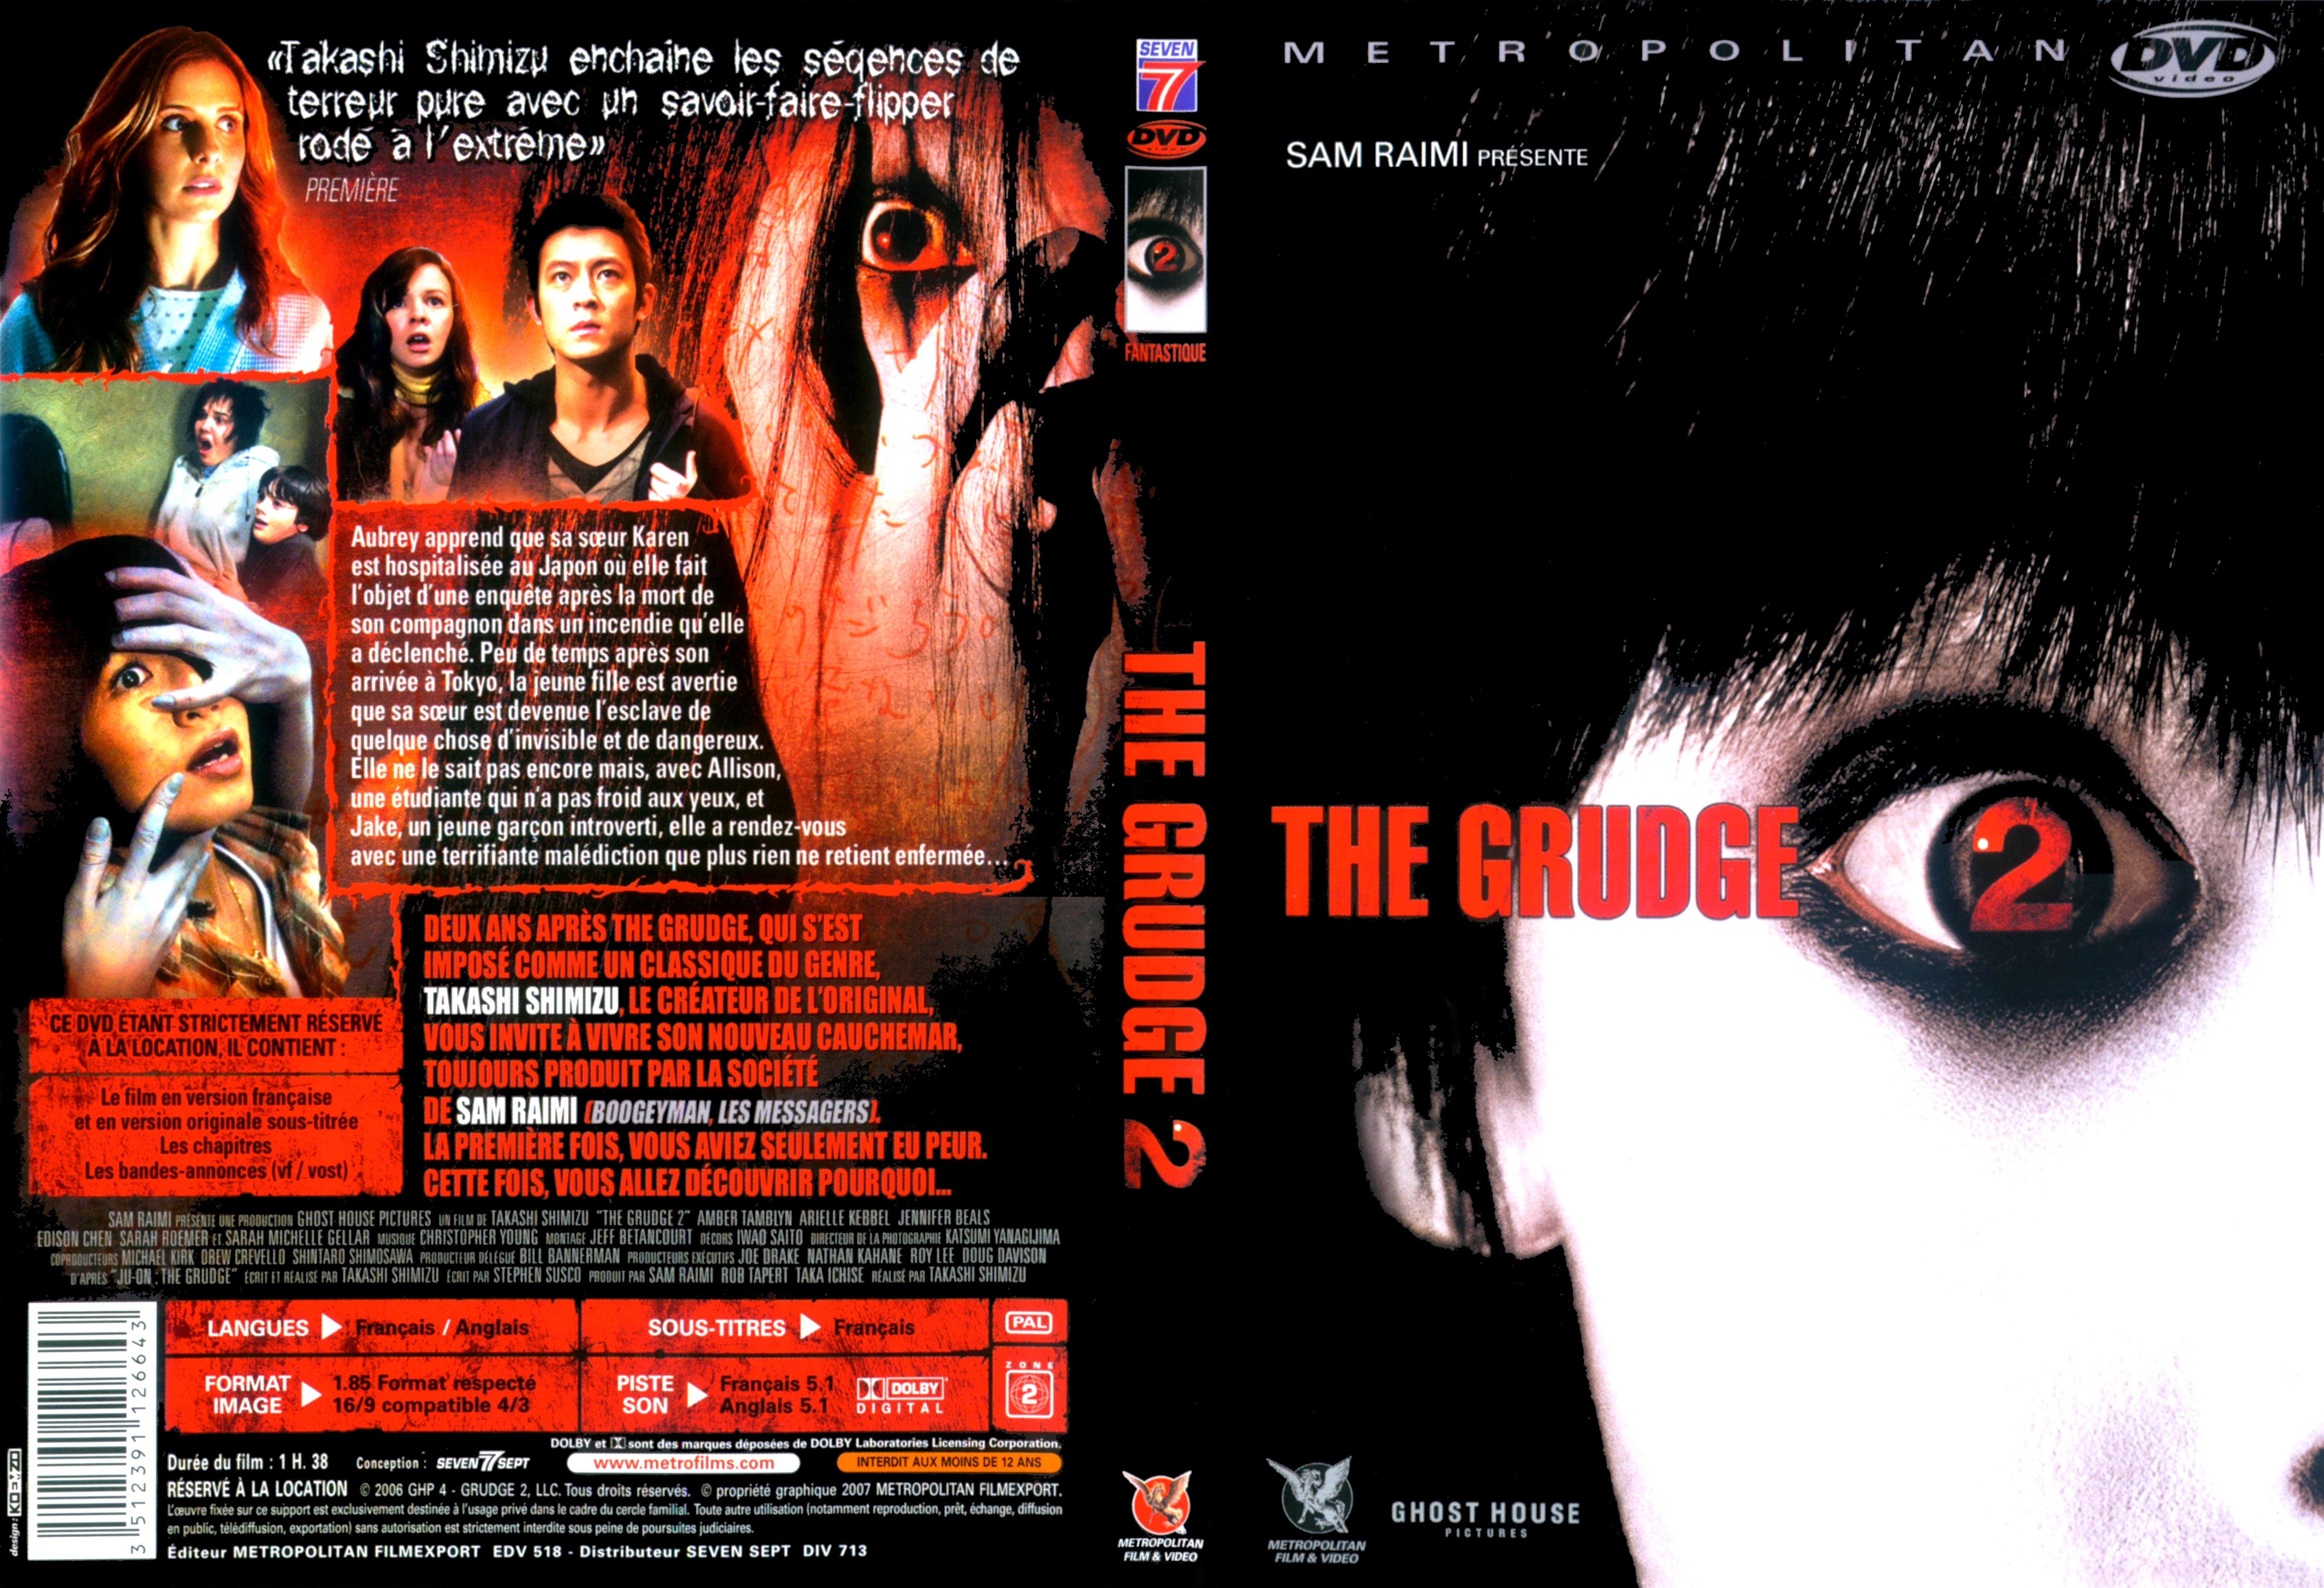 Jaquette DVD The Grudge 2 (2007)